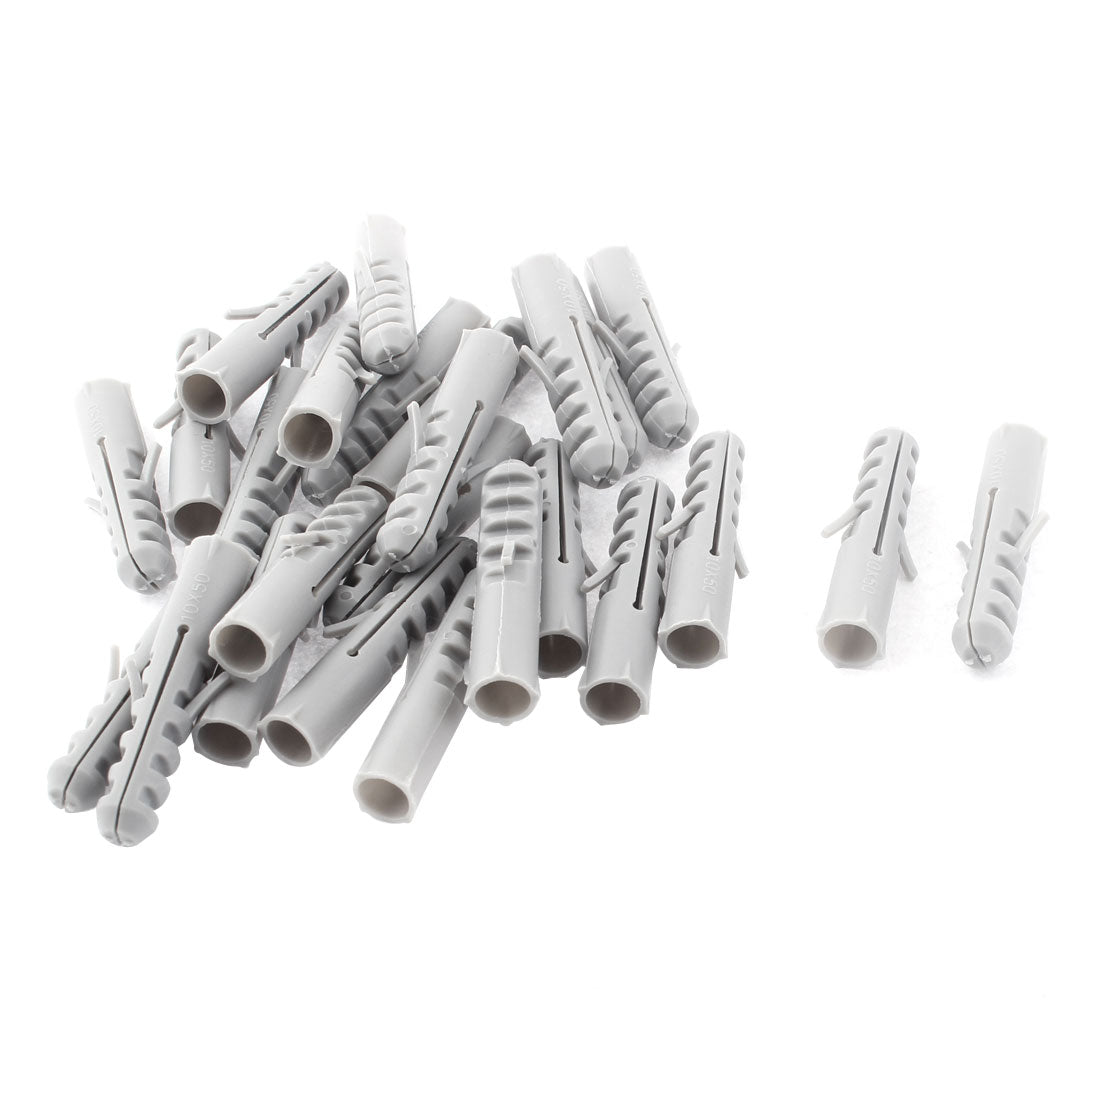 uxcell Uxcell 25 Pcs M10 x 50mm Plastic Anchors Lag Expand Expansion Nails Plugs Wall Screws Cable Clips